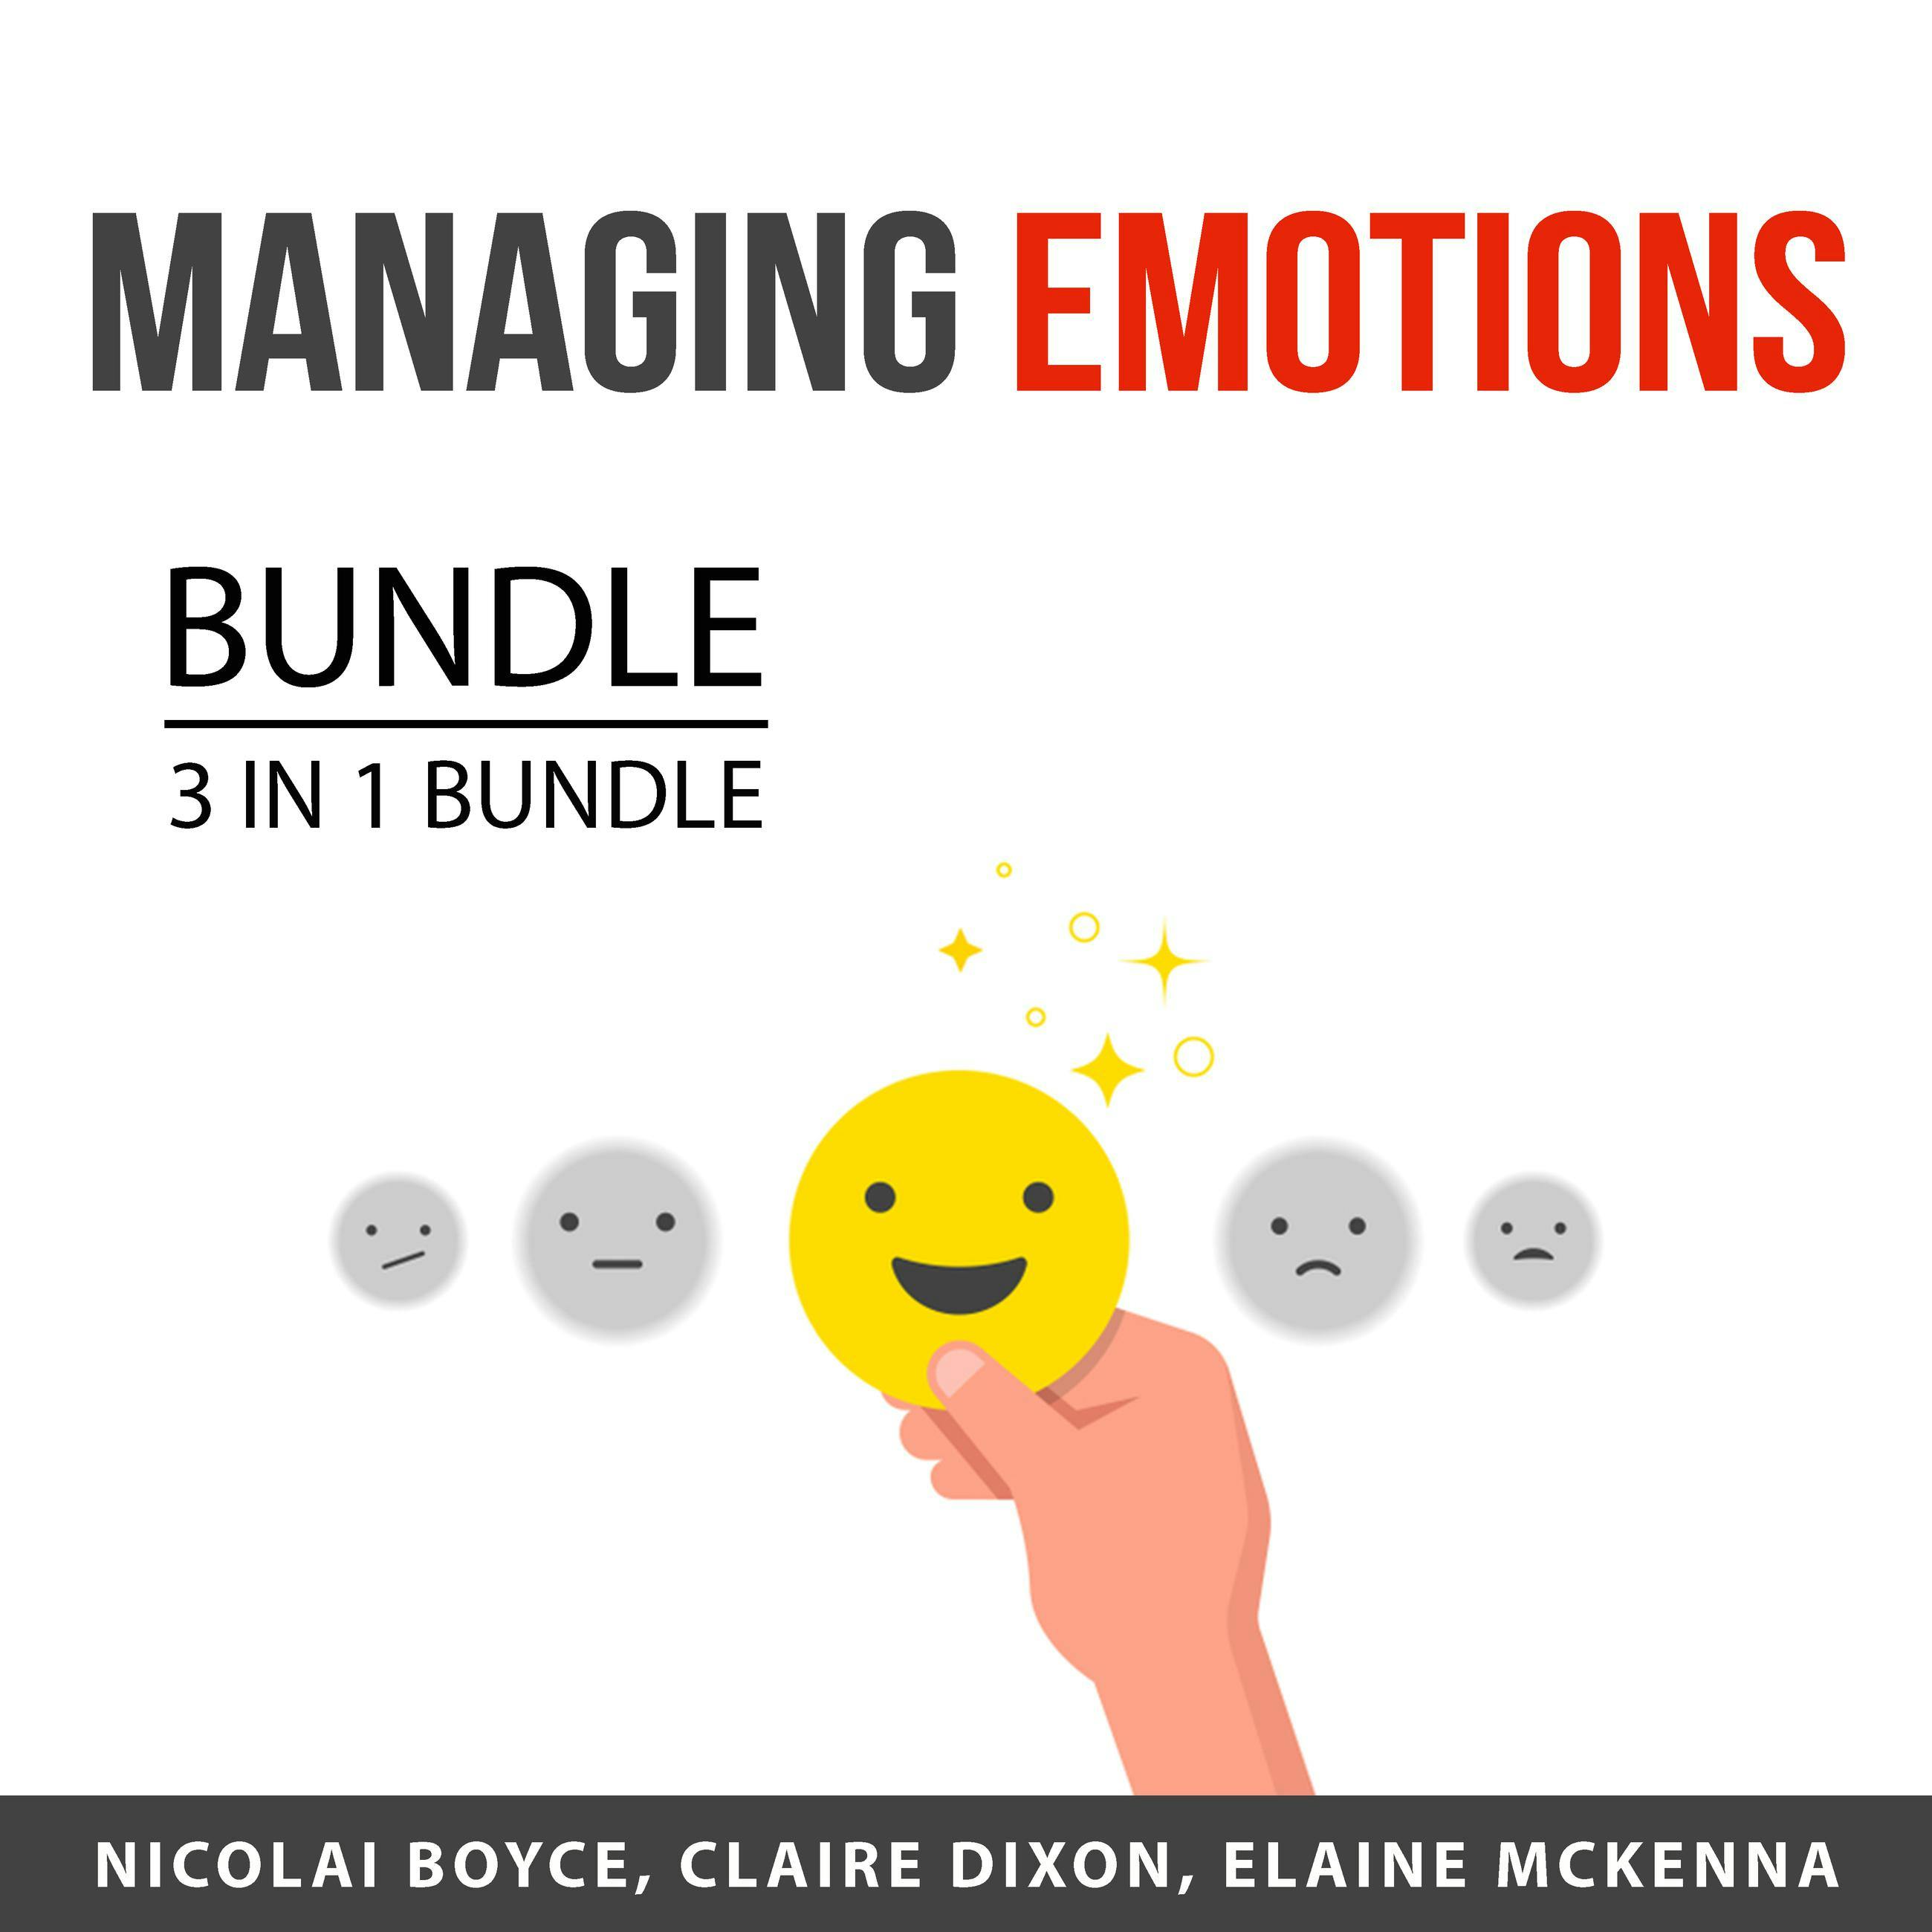 Managing Emotions Bundle, 3 in 1 Bundle: Anger Management Techniques, How to Feel Good and Emotional Intelligence Mastery - undefined